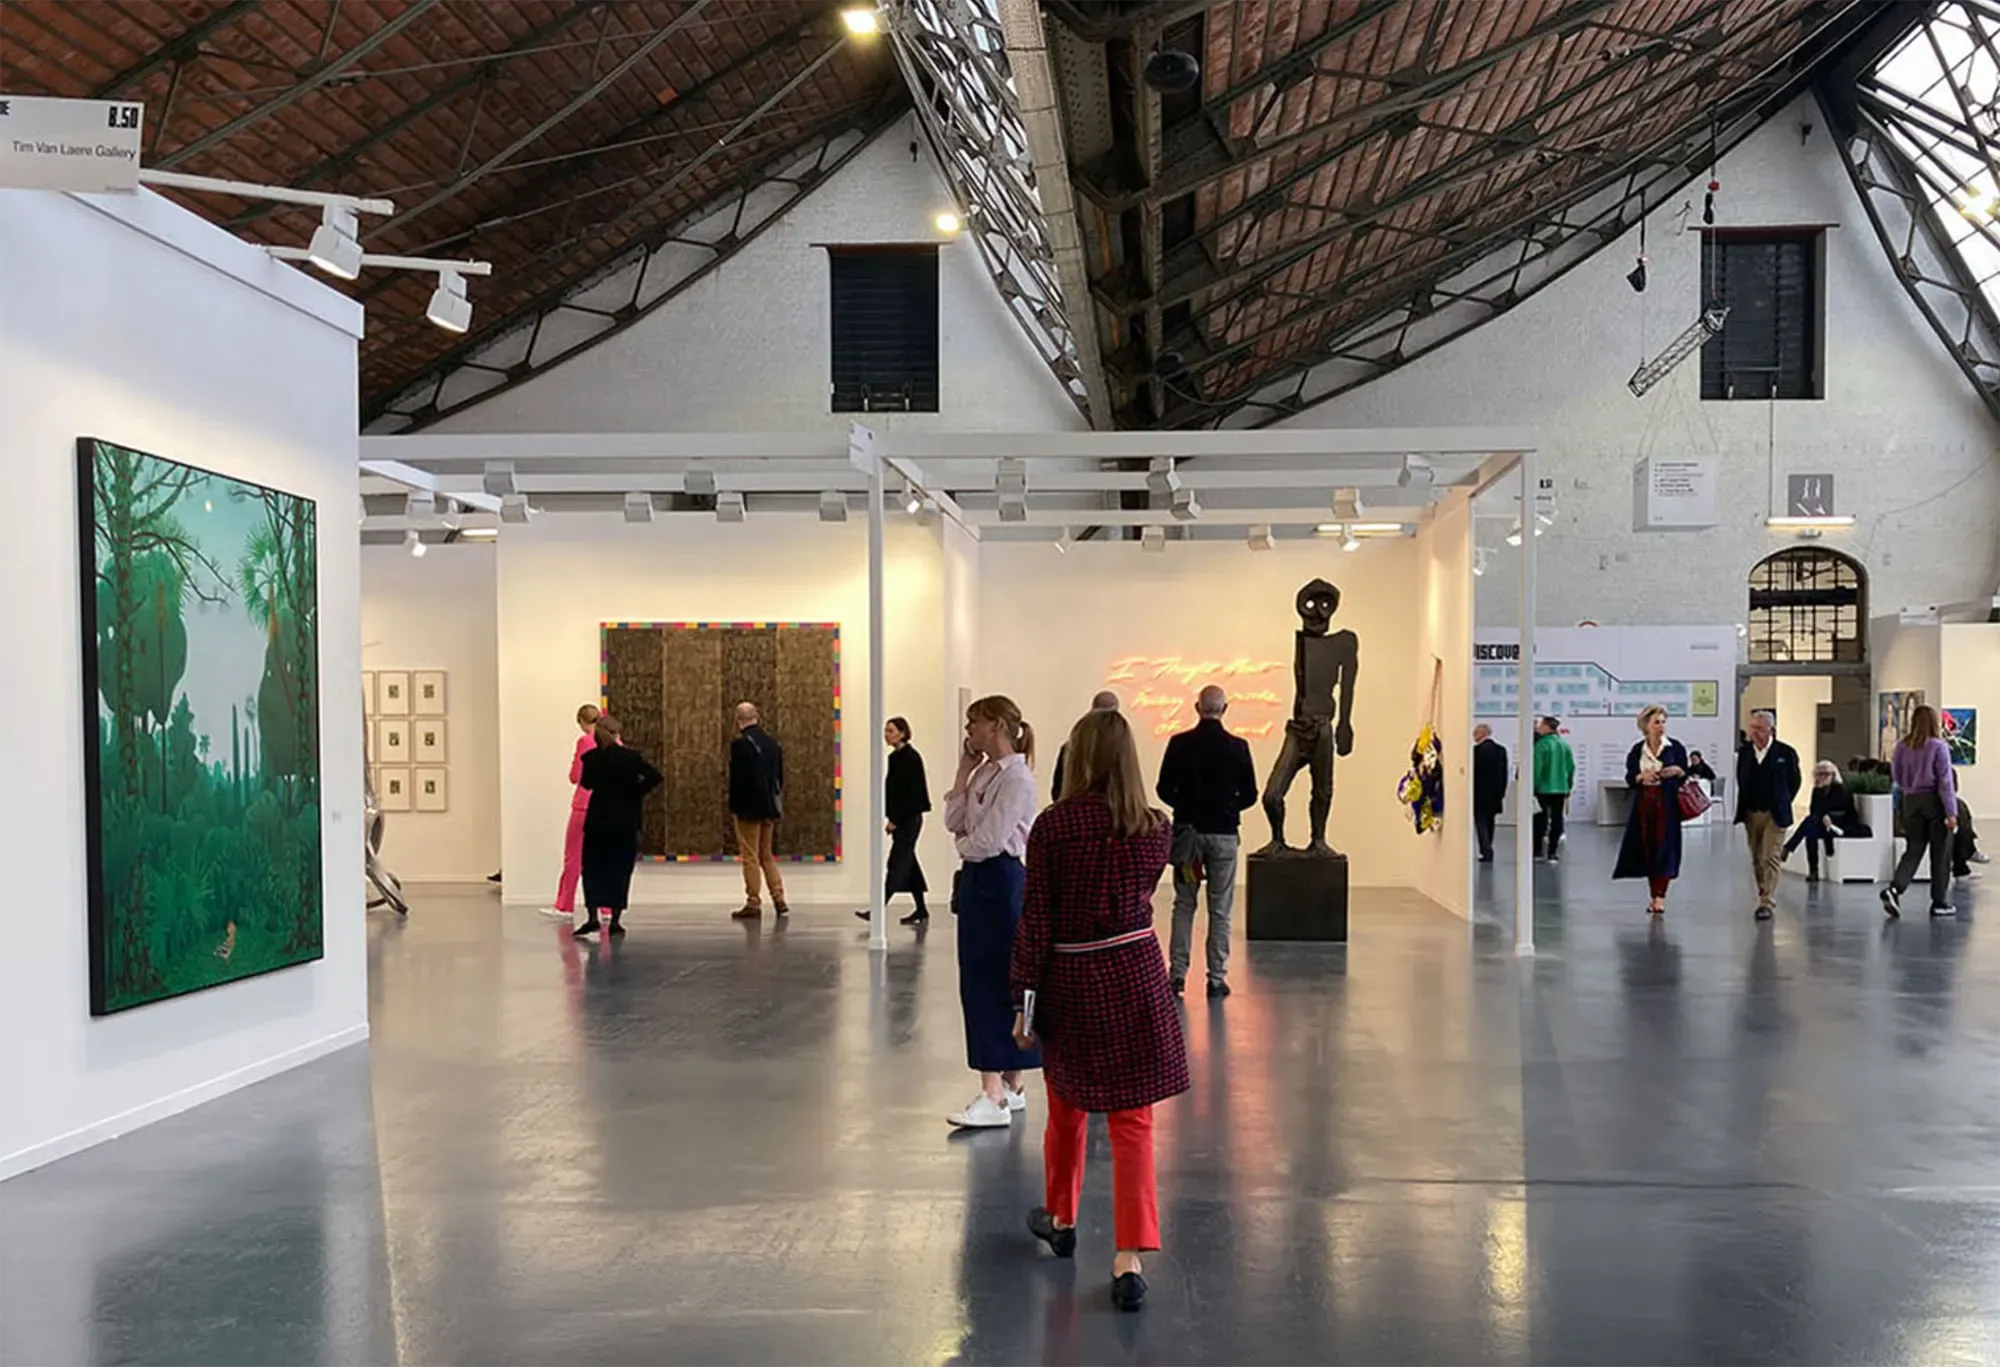 discover art Brussel with munchies art club full of new promising artists, galleries, and beyond